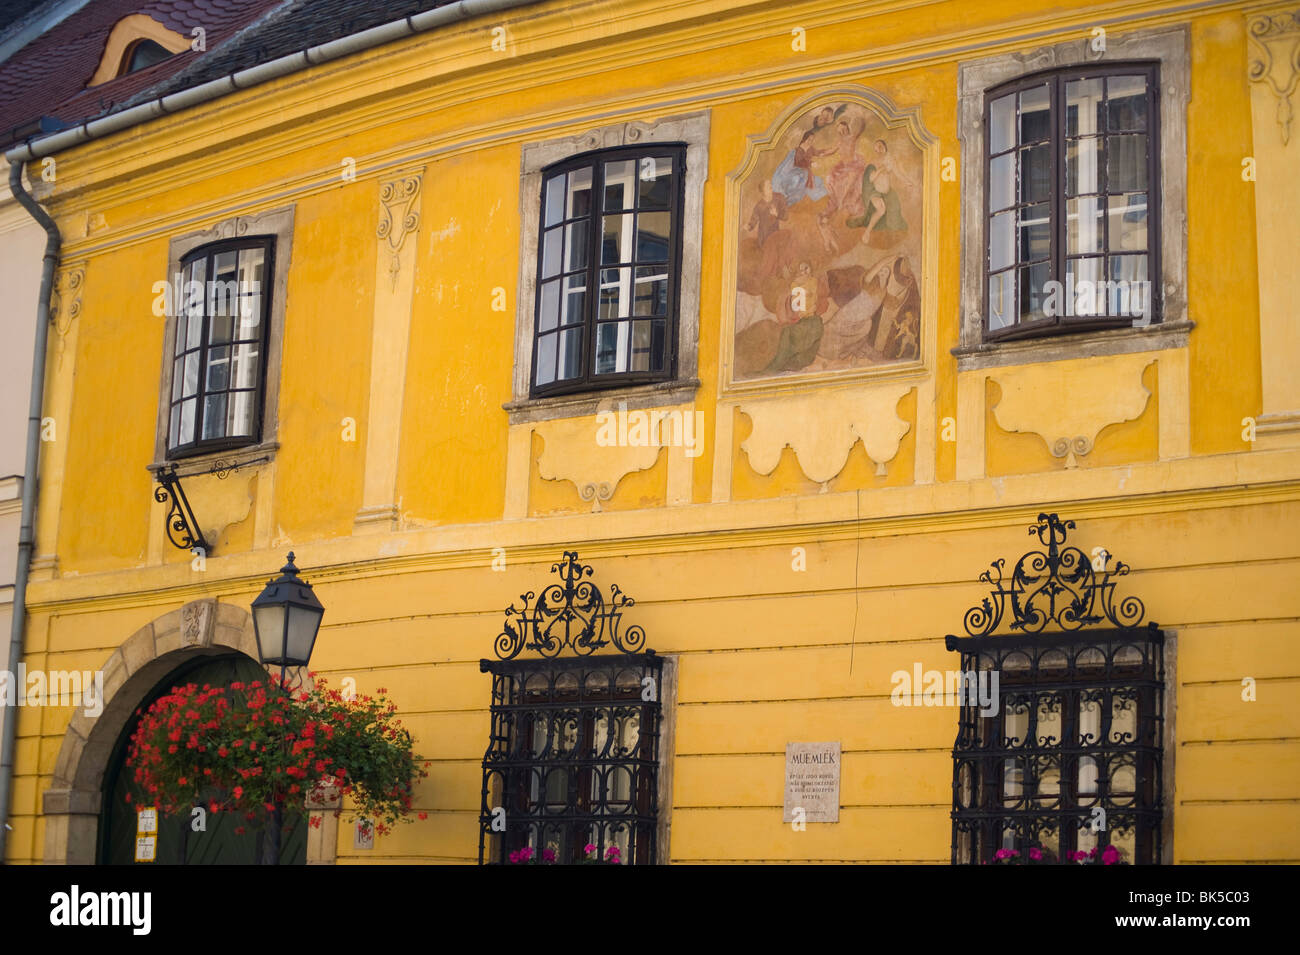 A colourful old building with a painting on the front in the Buda section, Budapest, Hungary, Europe Stock Photo